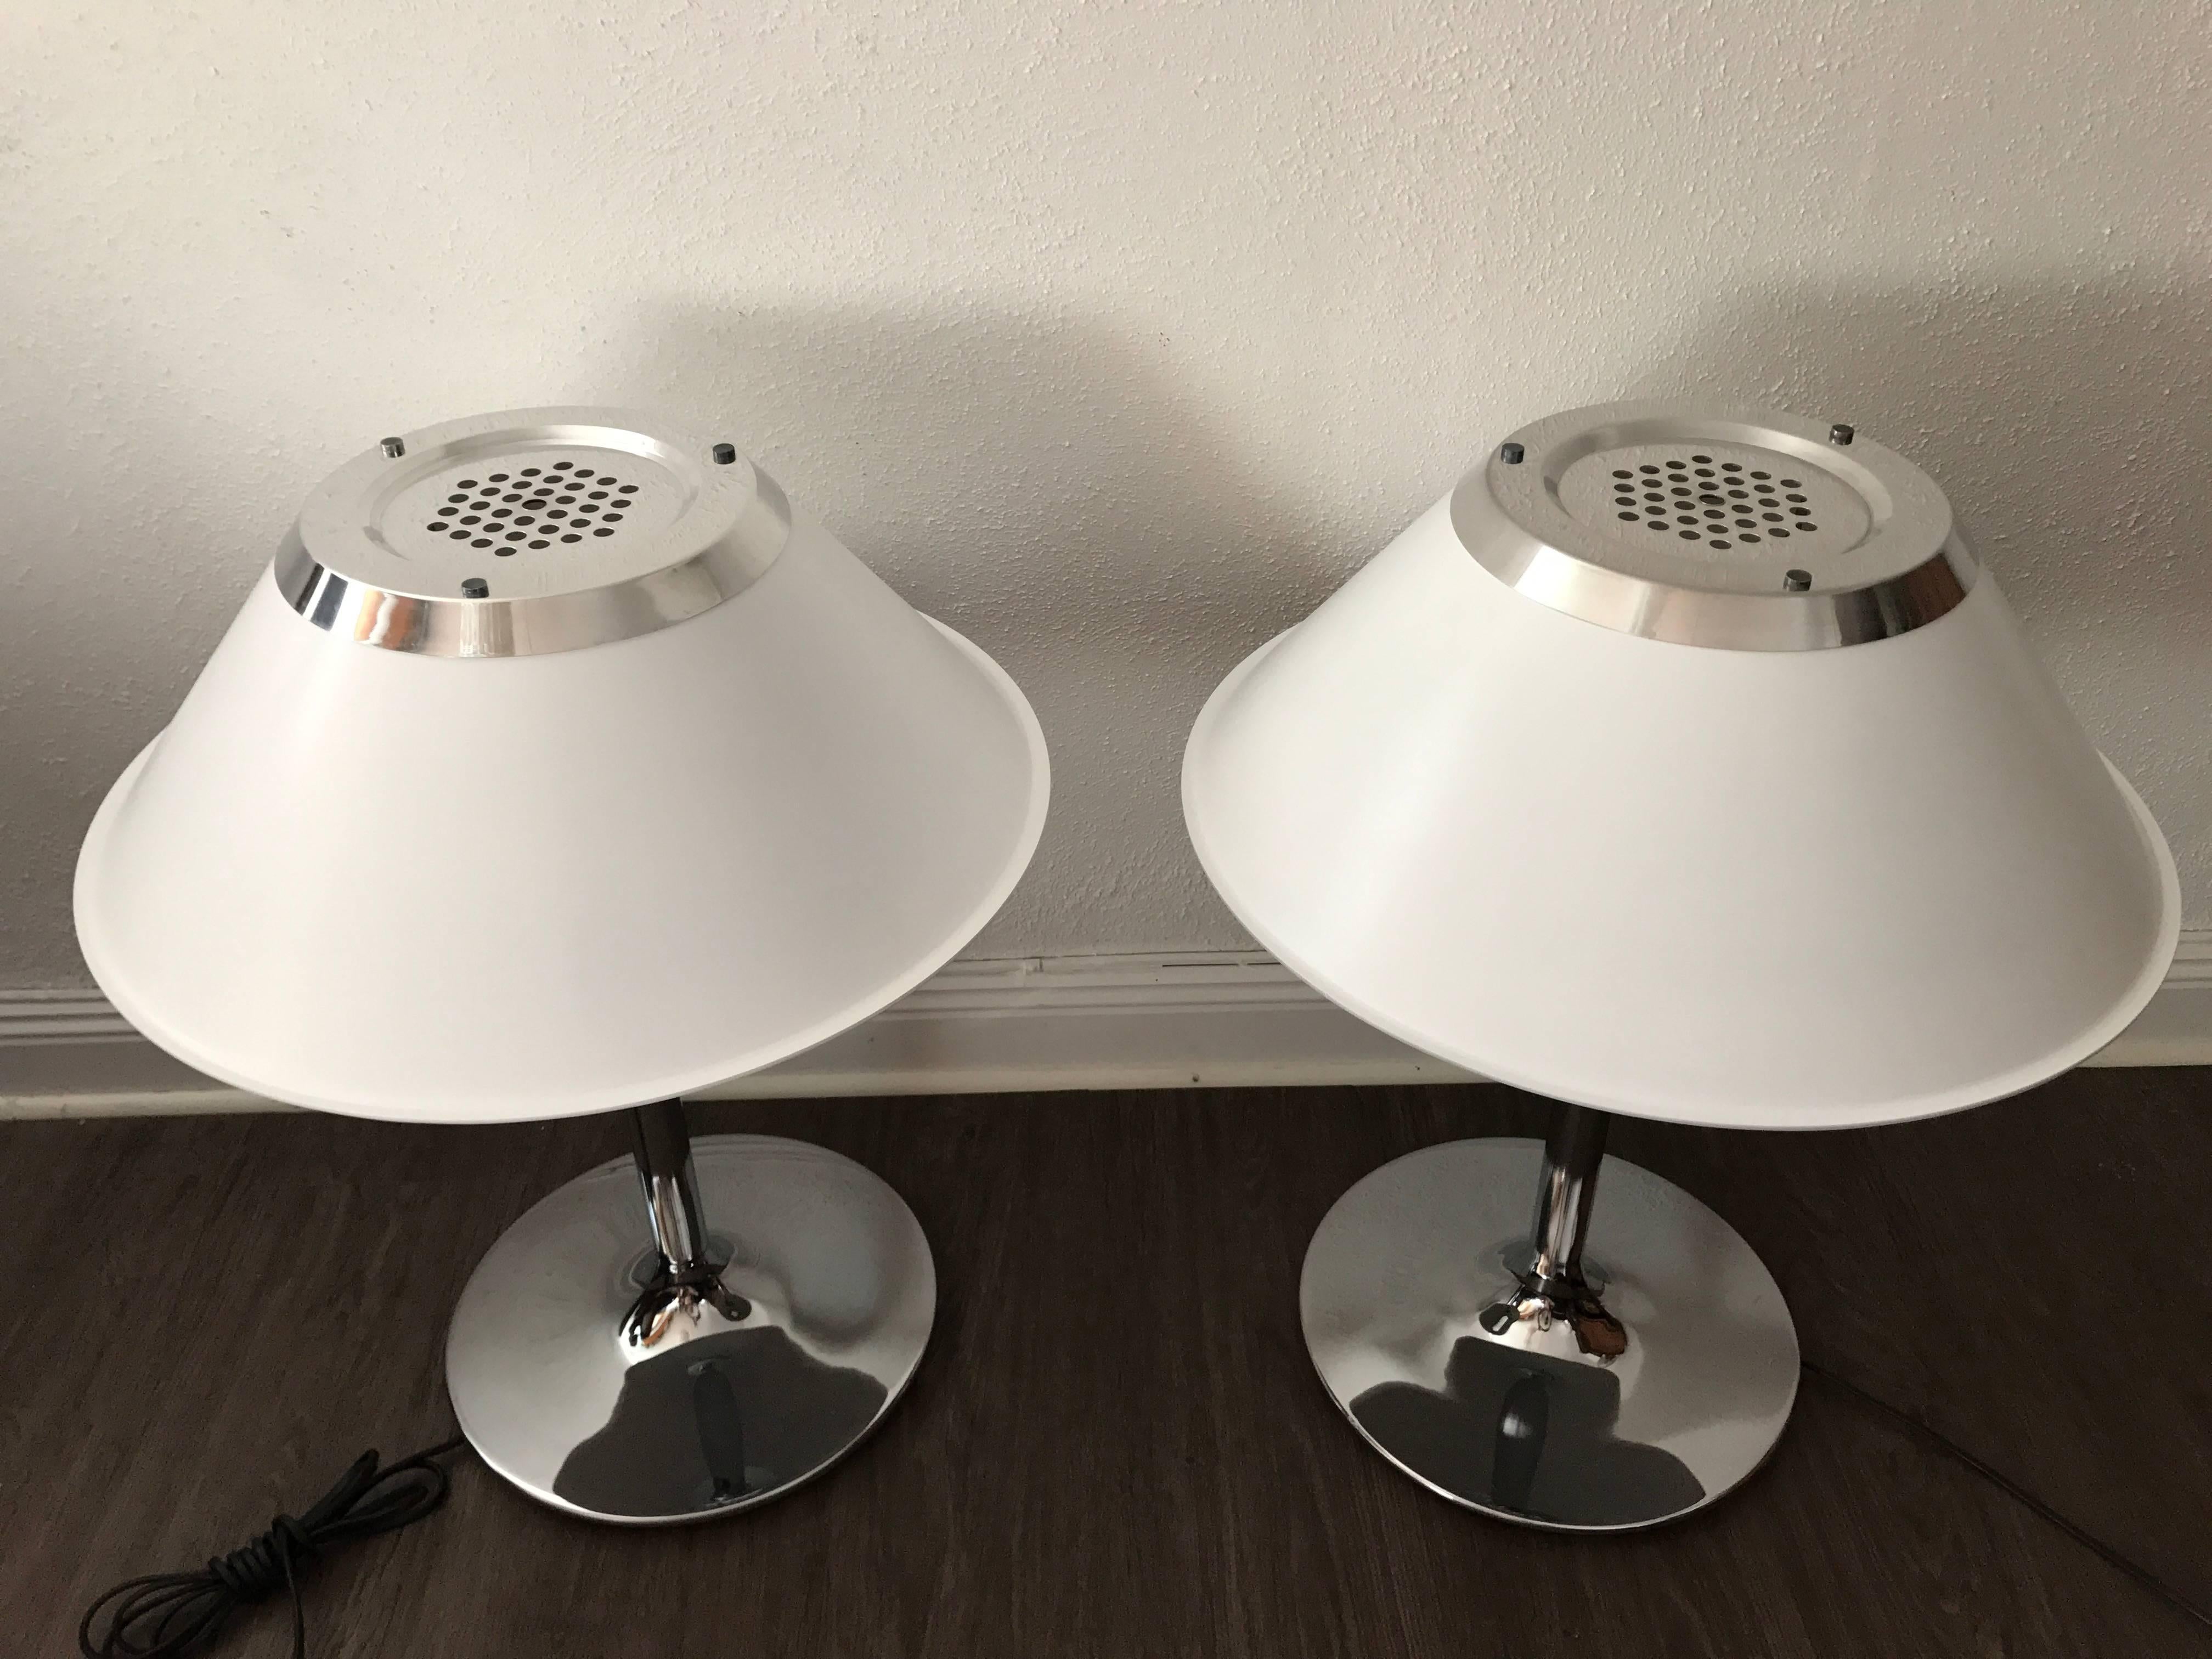 Pair of 1970 Swedish Atelje Lyktan "Mars" table lamps designed by Per Sundstedt,
A very nice pair of table lamps, the shades are made of plastic with an perforated aluminum top and the foot is made of chromed steel. This pair is in a